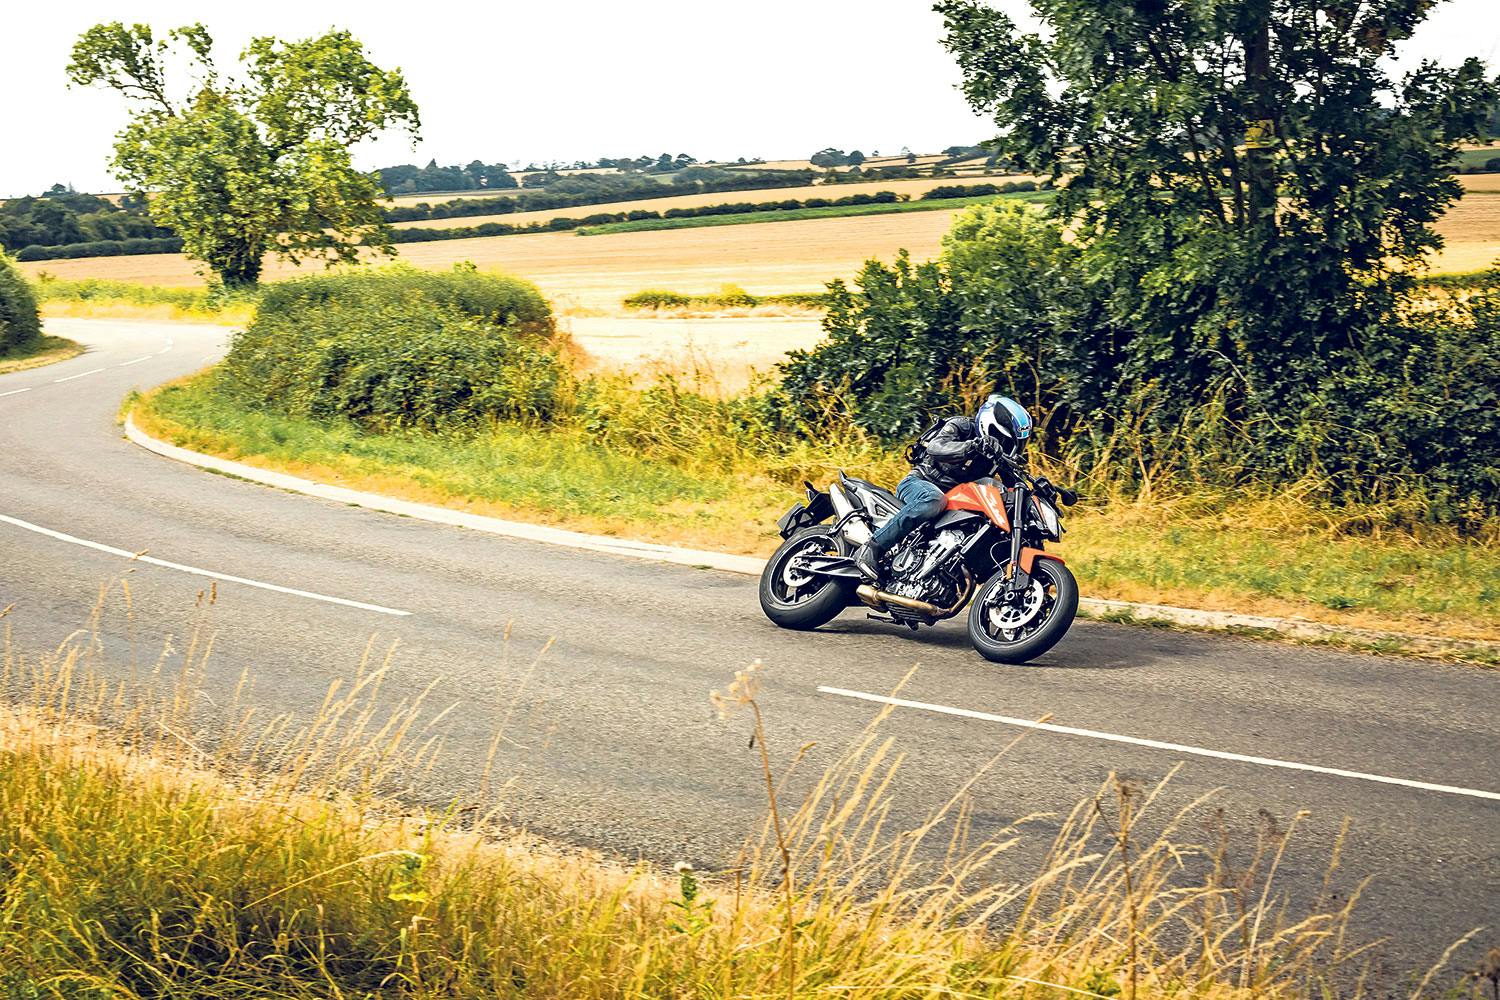 Premium bond: The best laminated motorcycle trousers | MCN